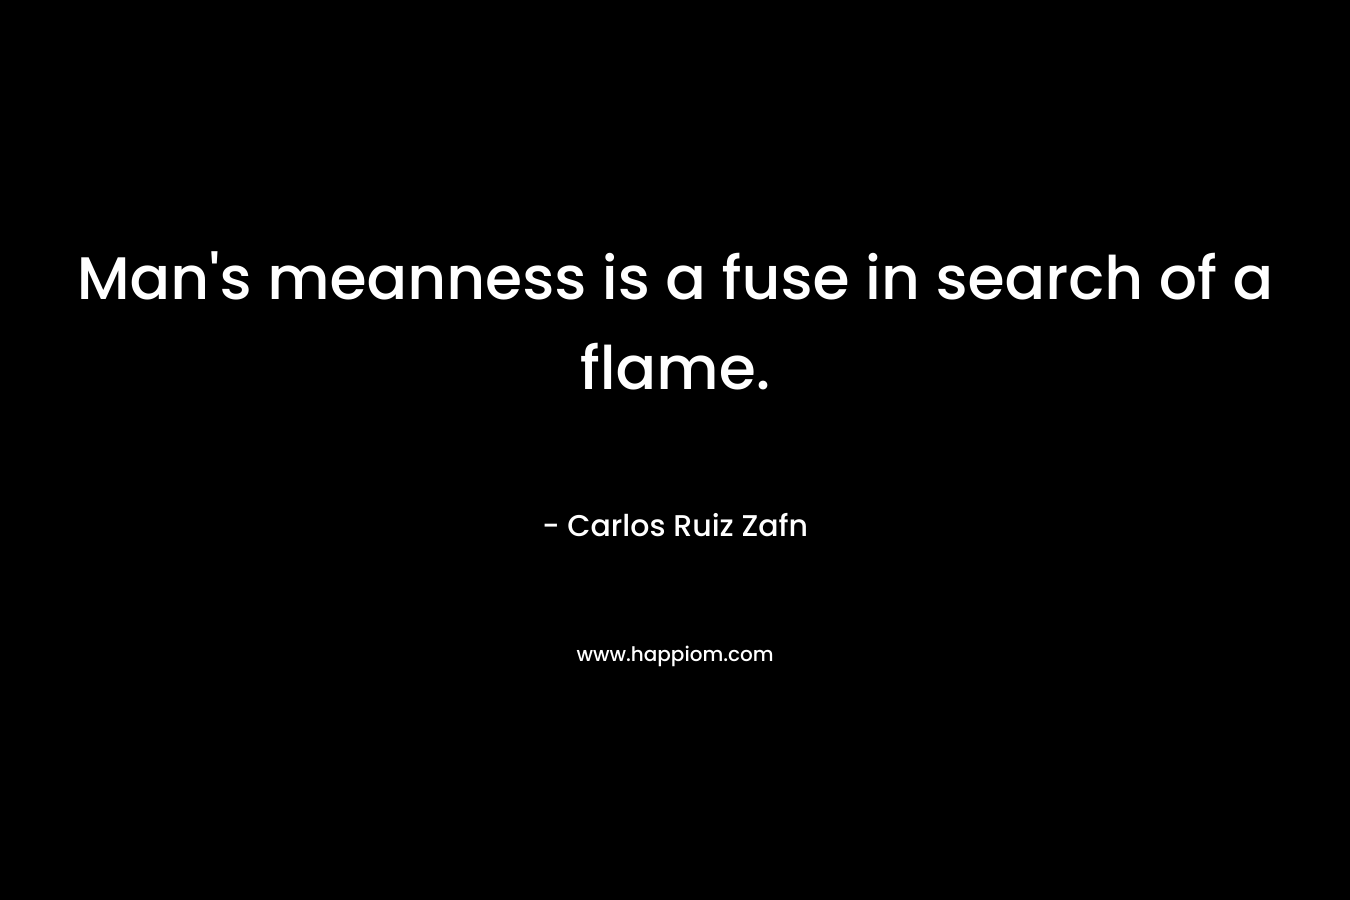 Man’s meanness is a fuse in search of a flame. – Carlos Ruiz Zafn